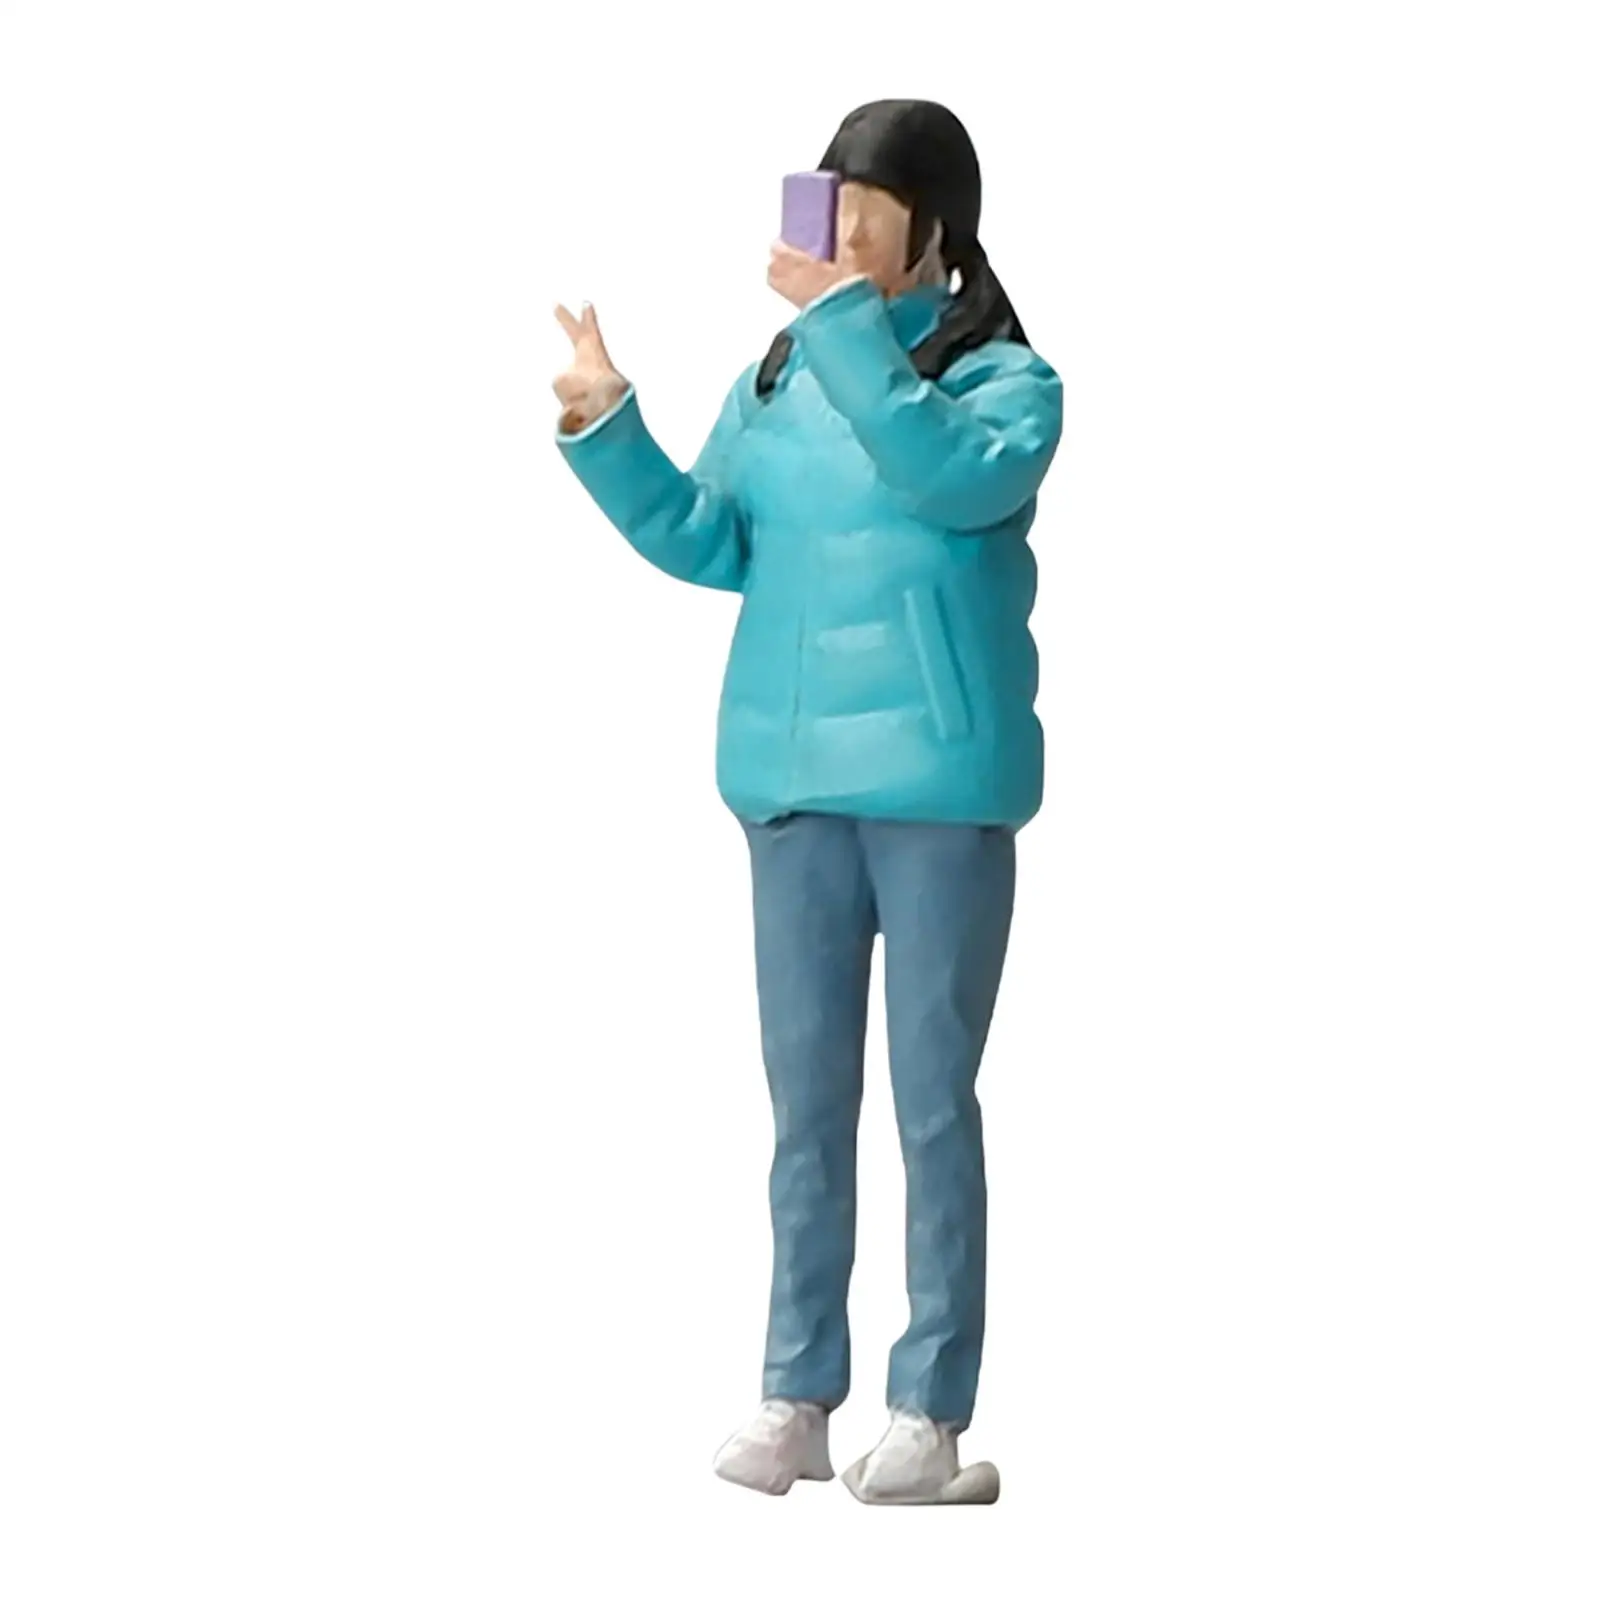 1:64 People Figures Down Jacket Girl Sand Table Ornament Miniature People Figurines Crafts for Scenery Landscape Dollhouse Decor